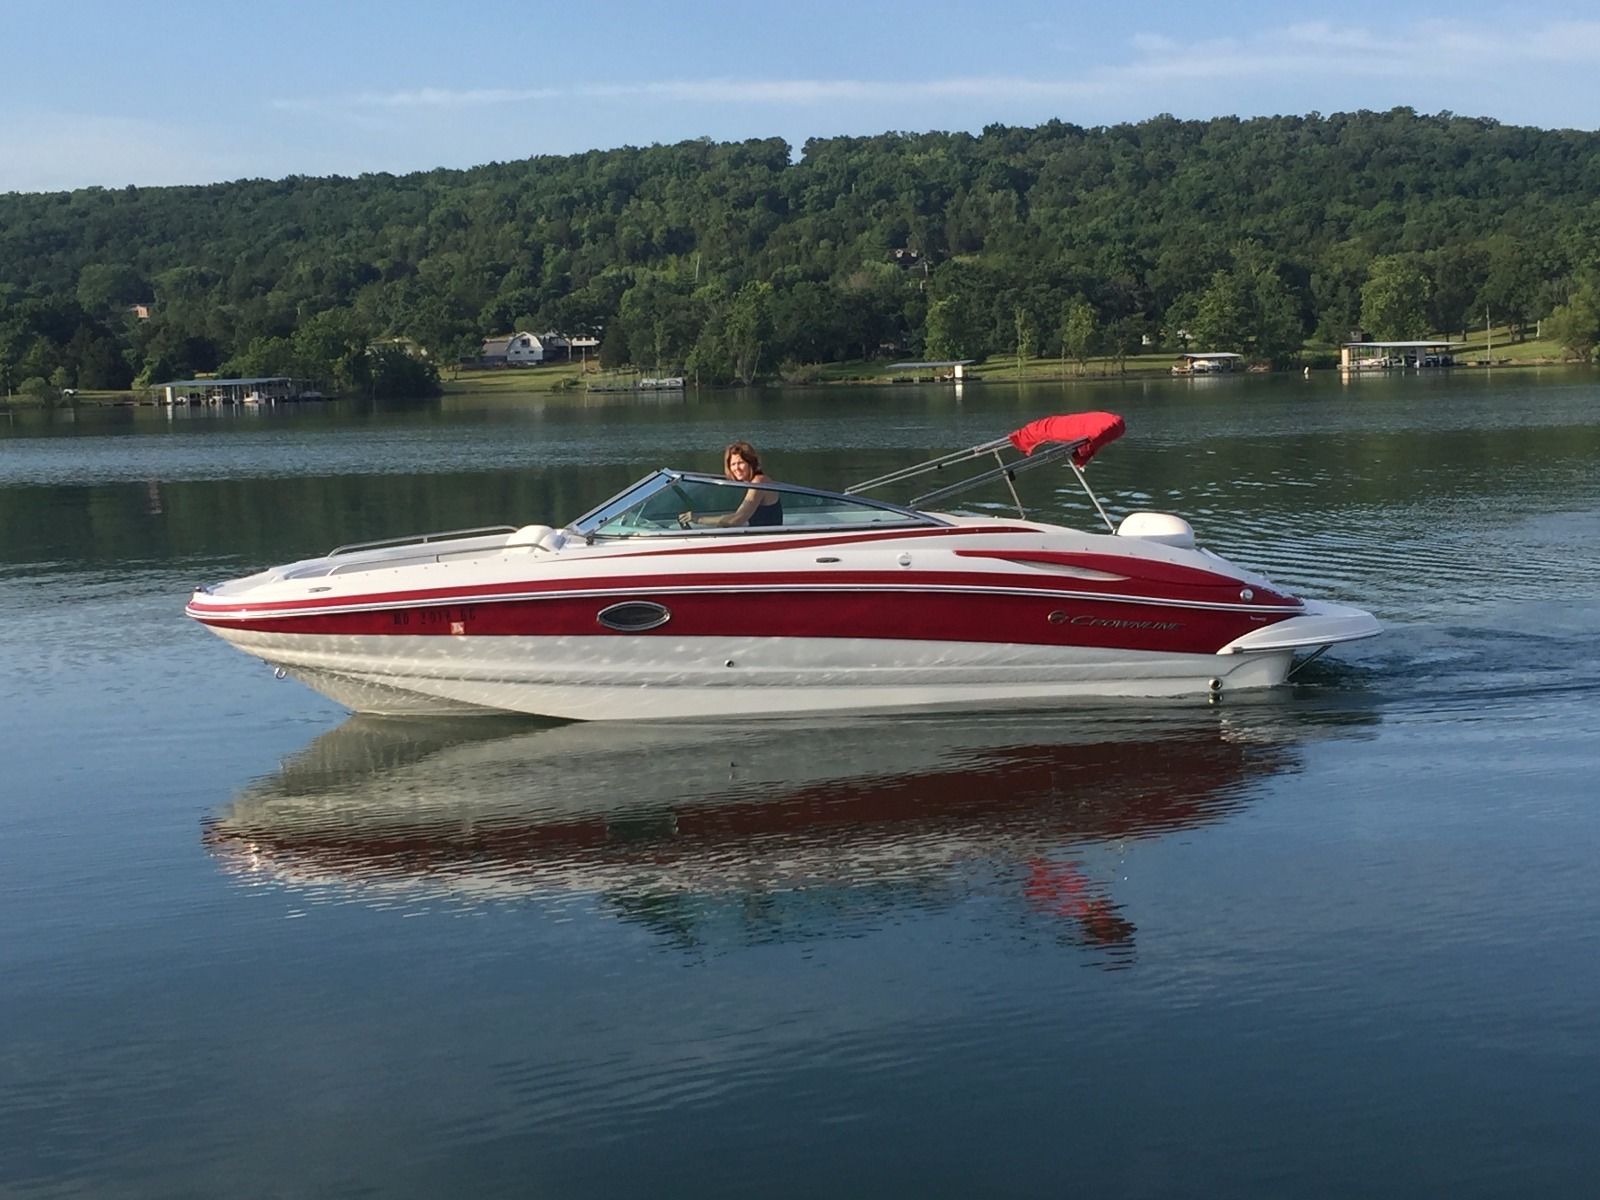 Crownline 2011 for sale for $42,000 - www.semadata.org